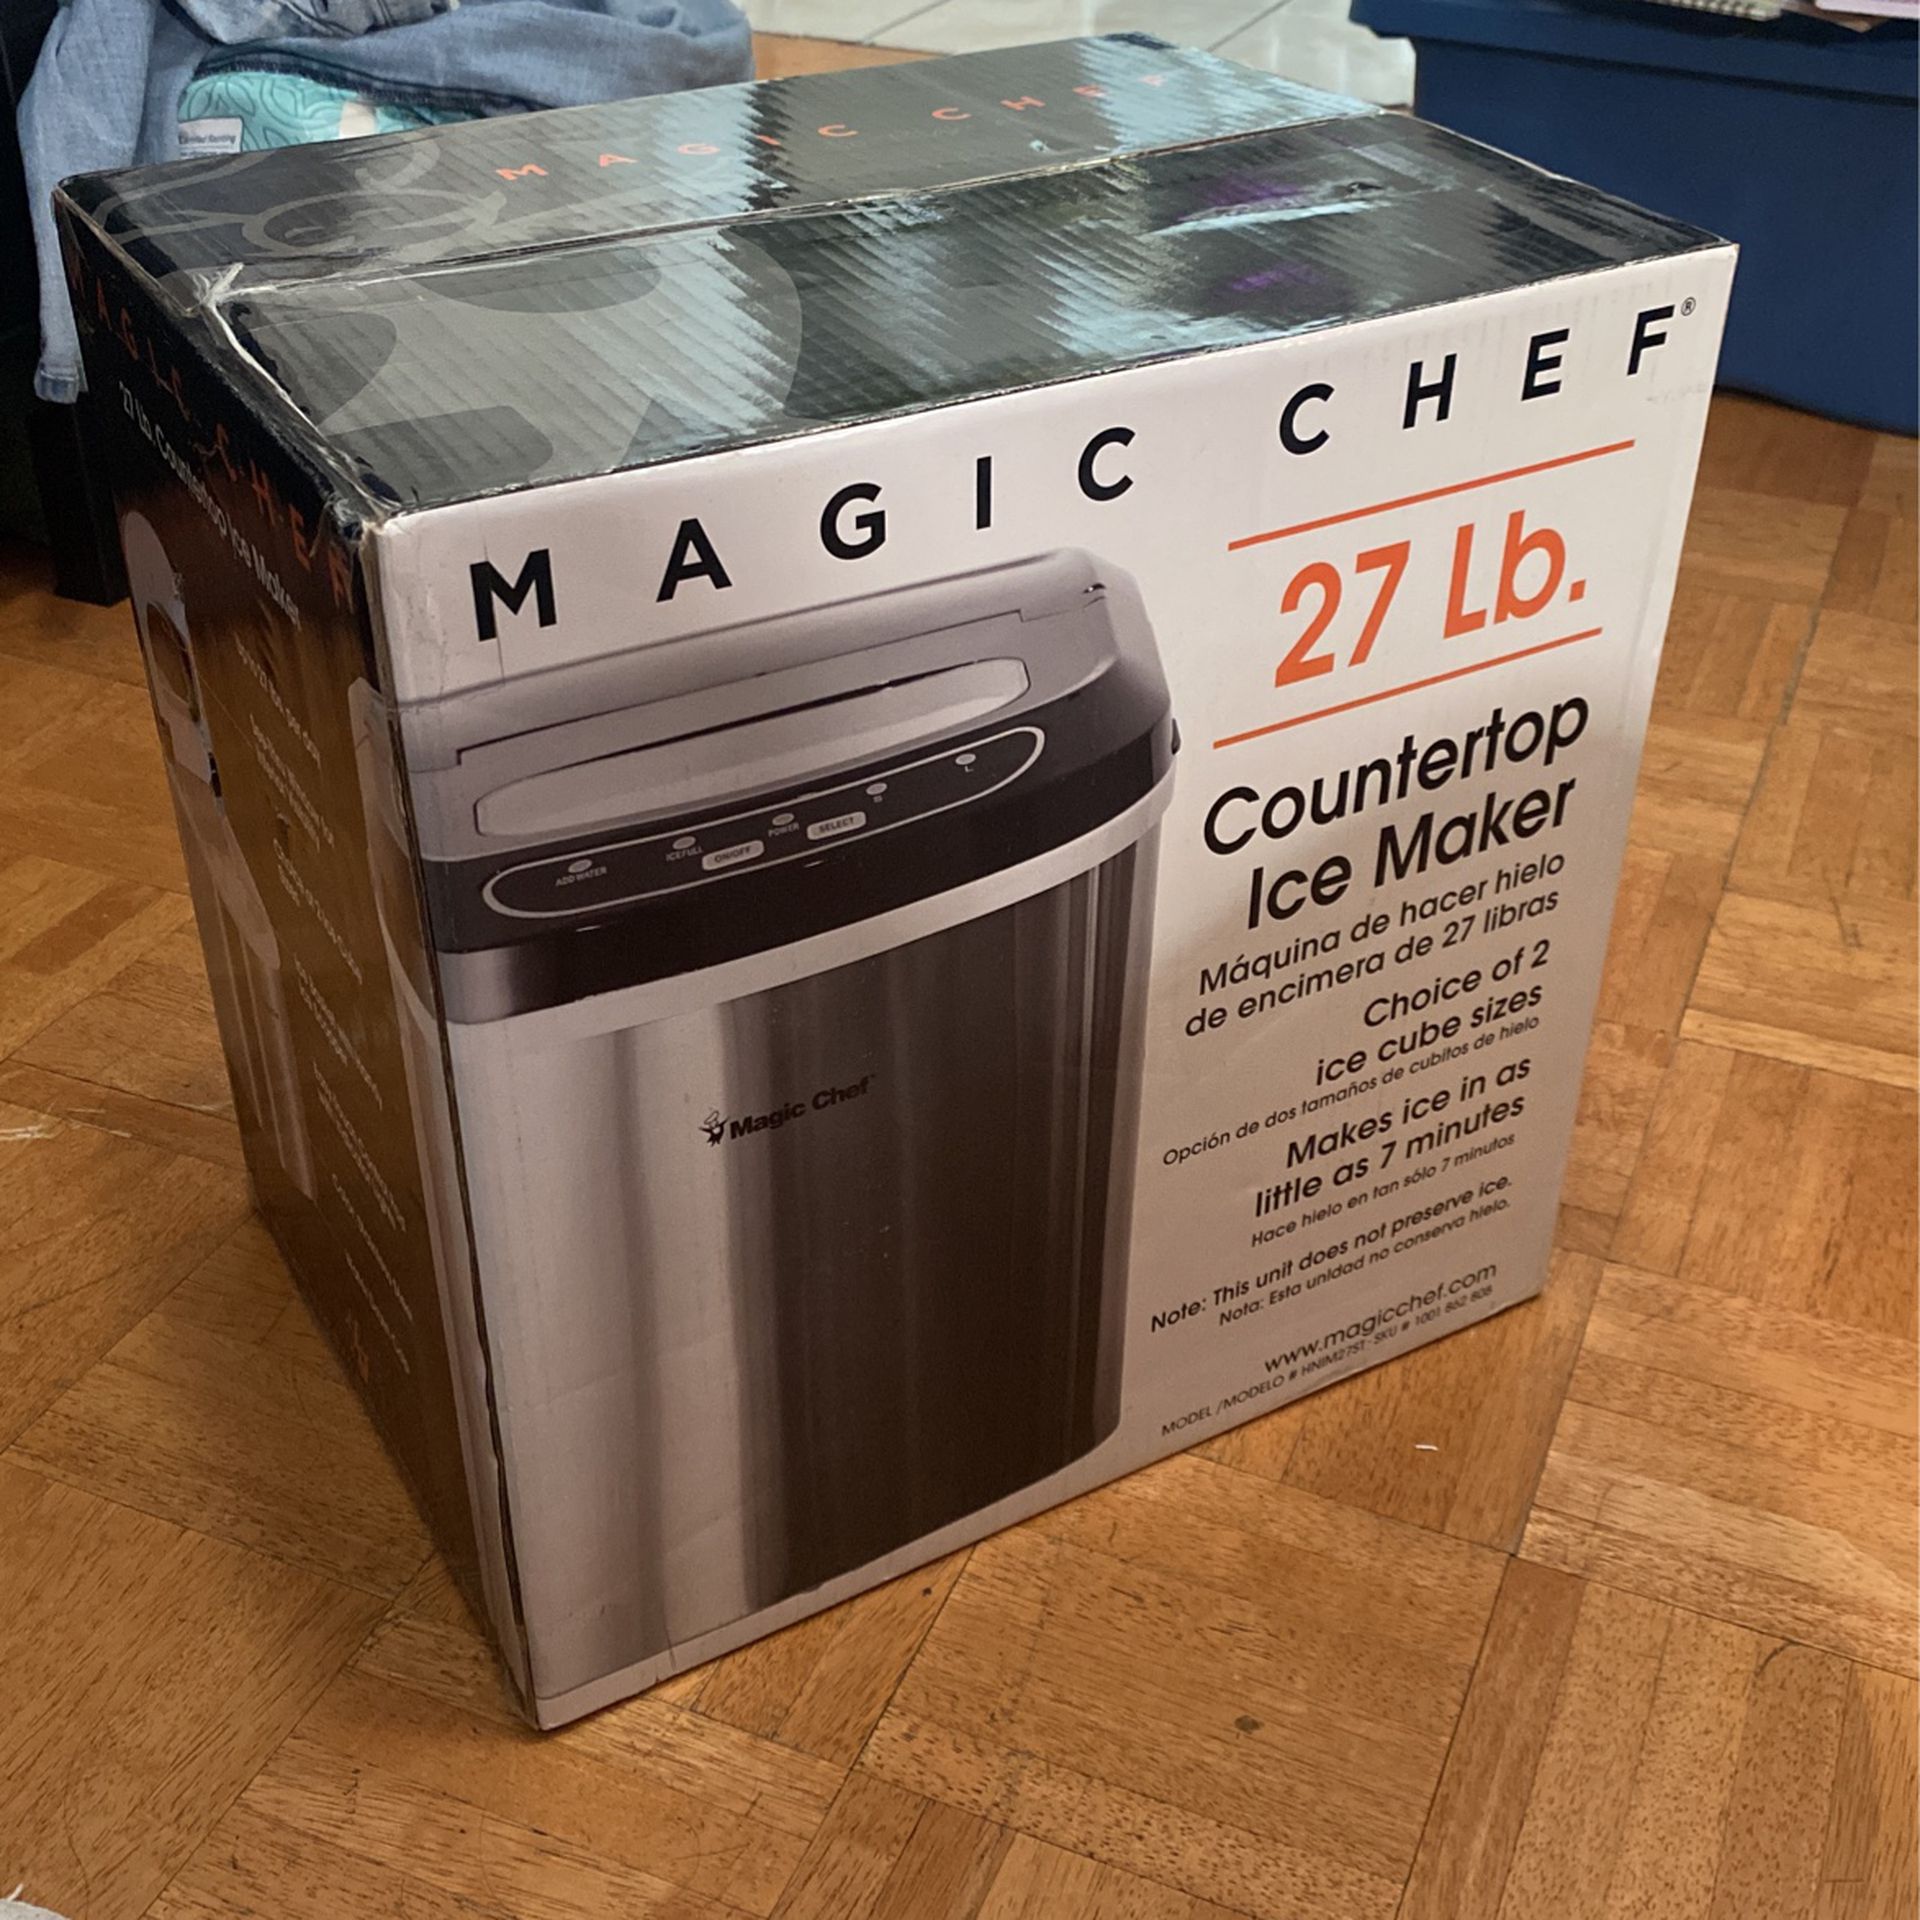 Magic Chef Ice Maker for Sale in Whittier, CA - OfferUp